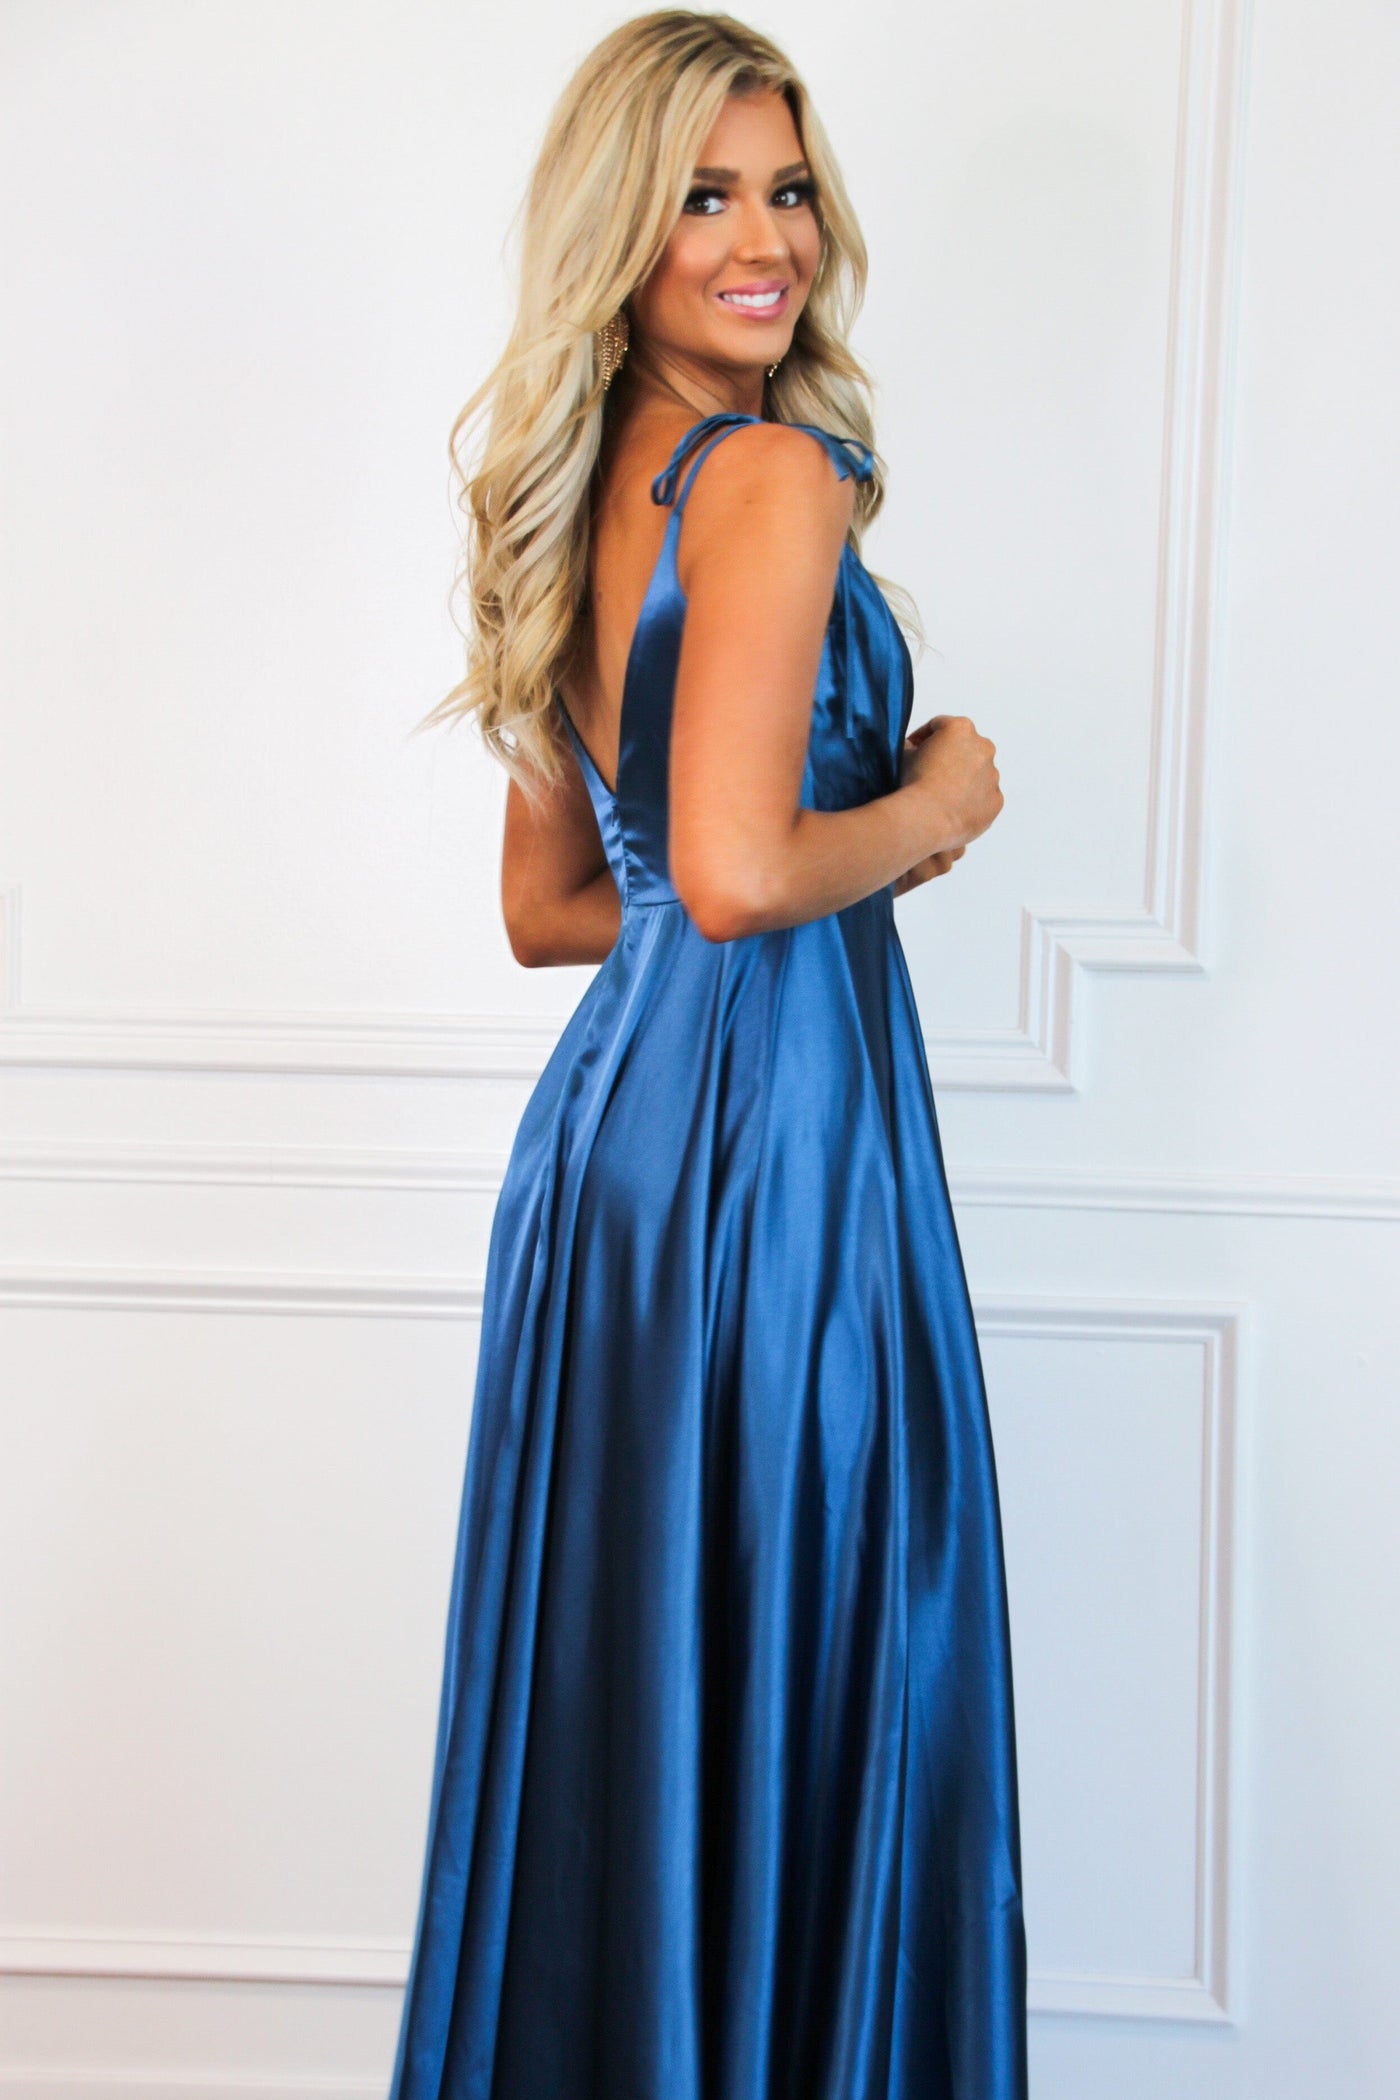 Born to Love You Satin Slit Formal Dress: Teal Navy - Bella and Bloom Boutique